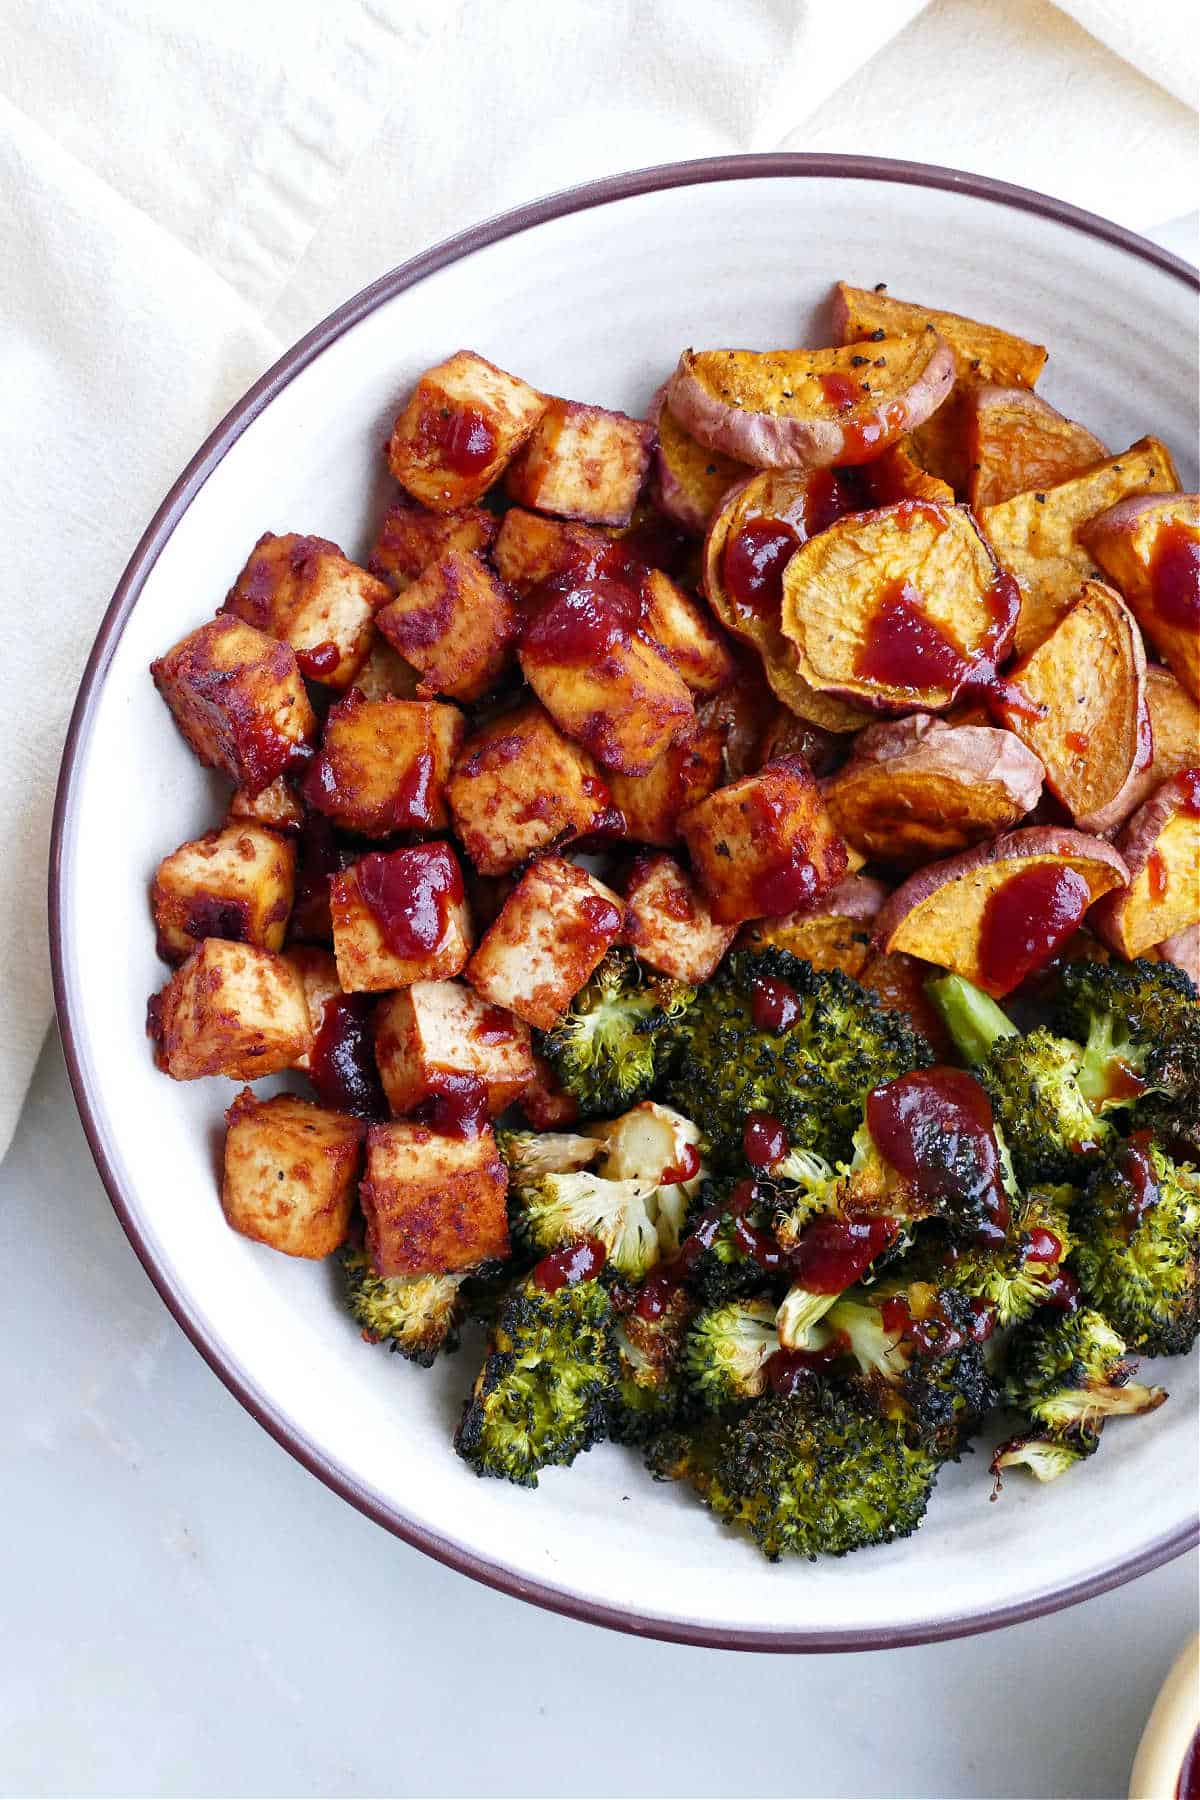 Bbq marinated tofu and broccoli with barbecue sauce drizzled over top.